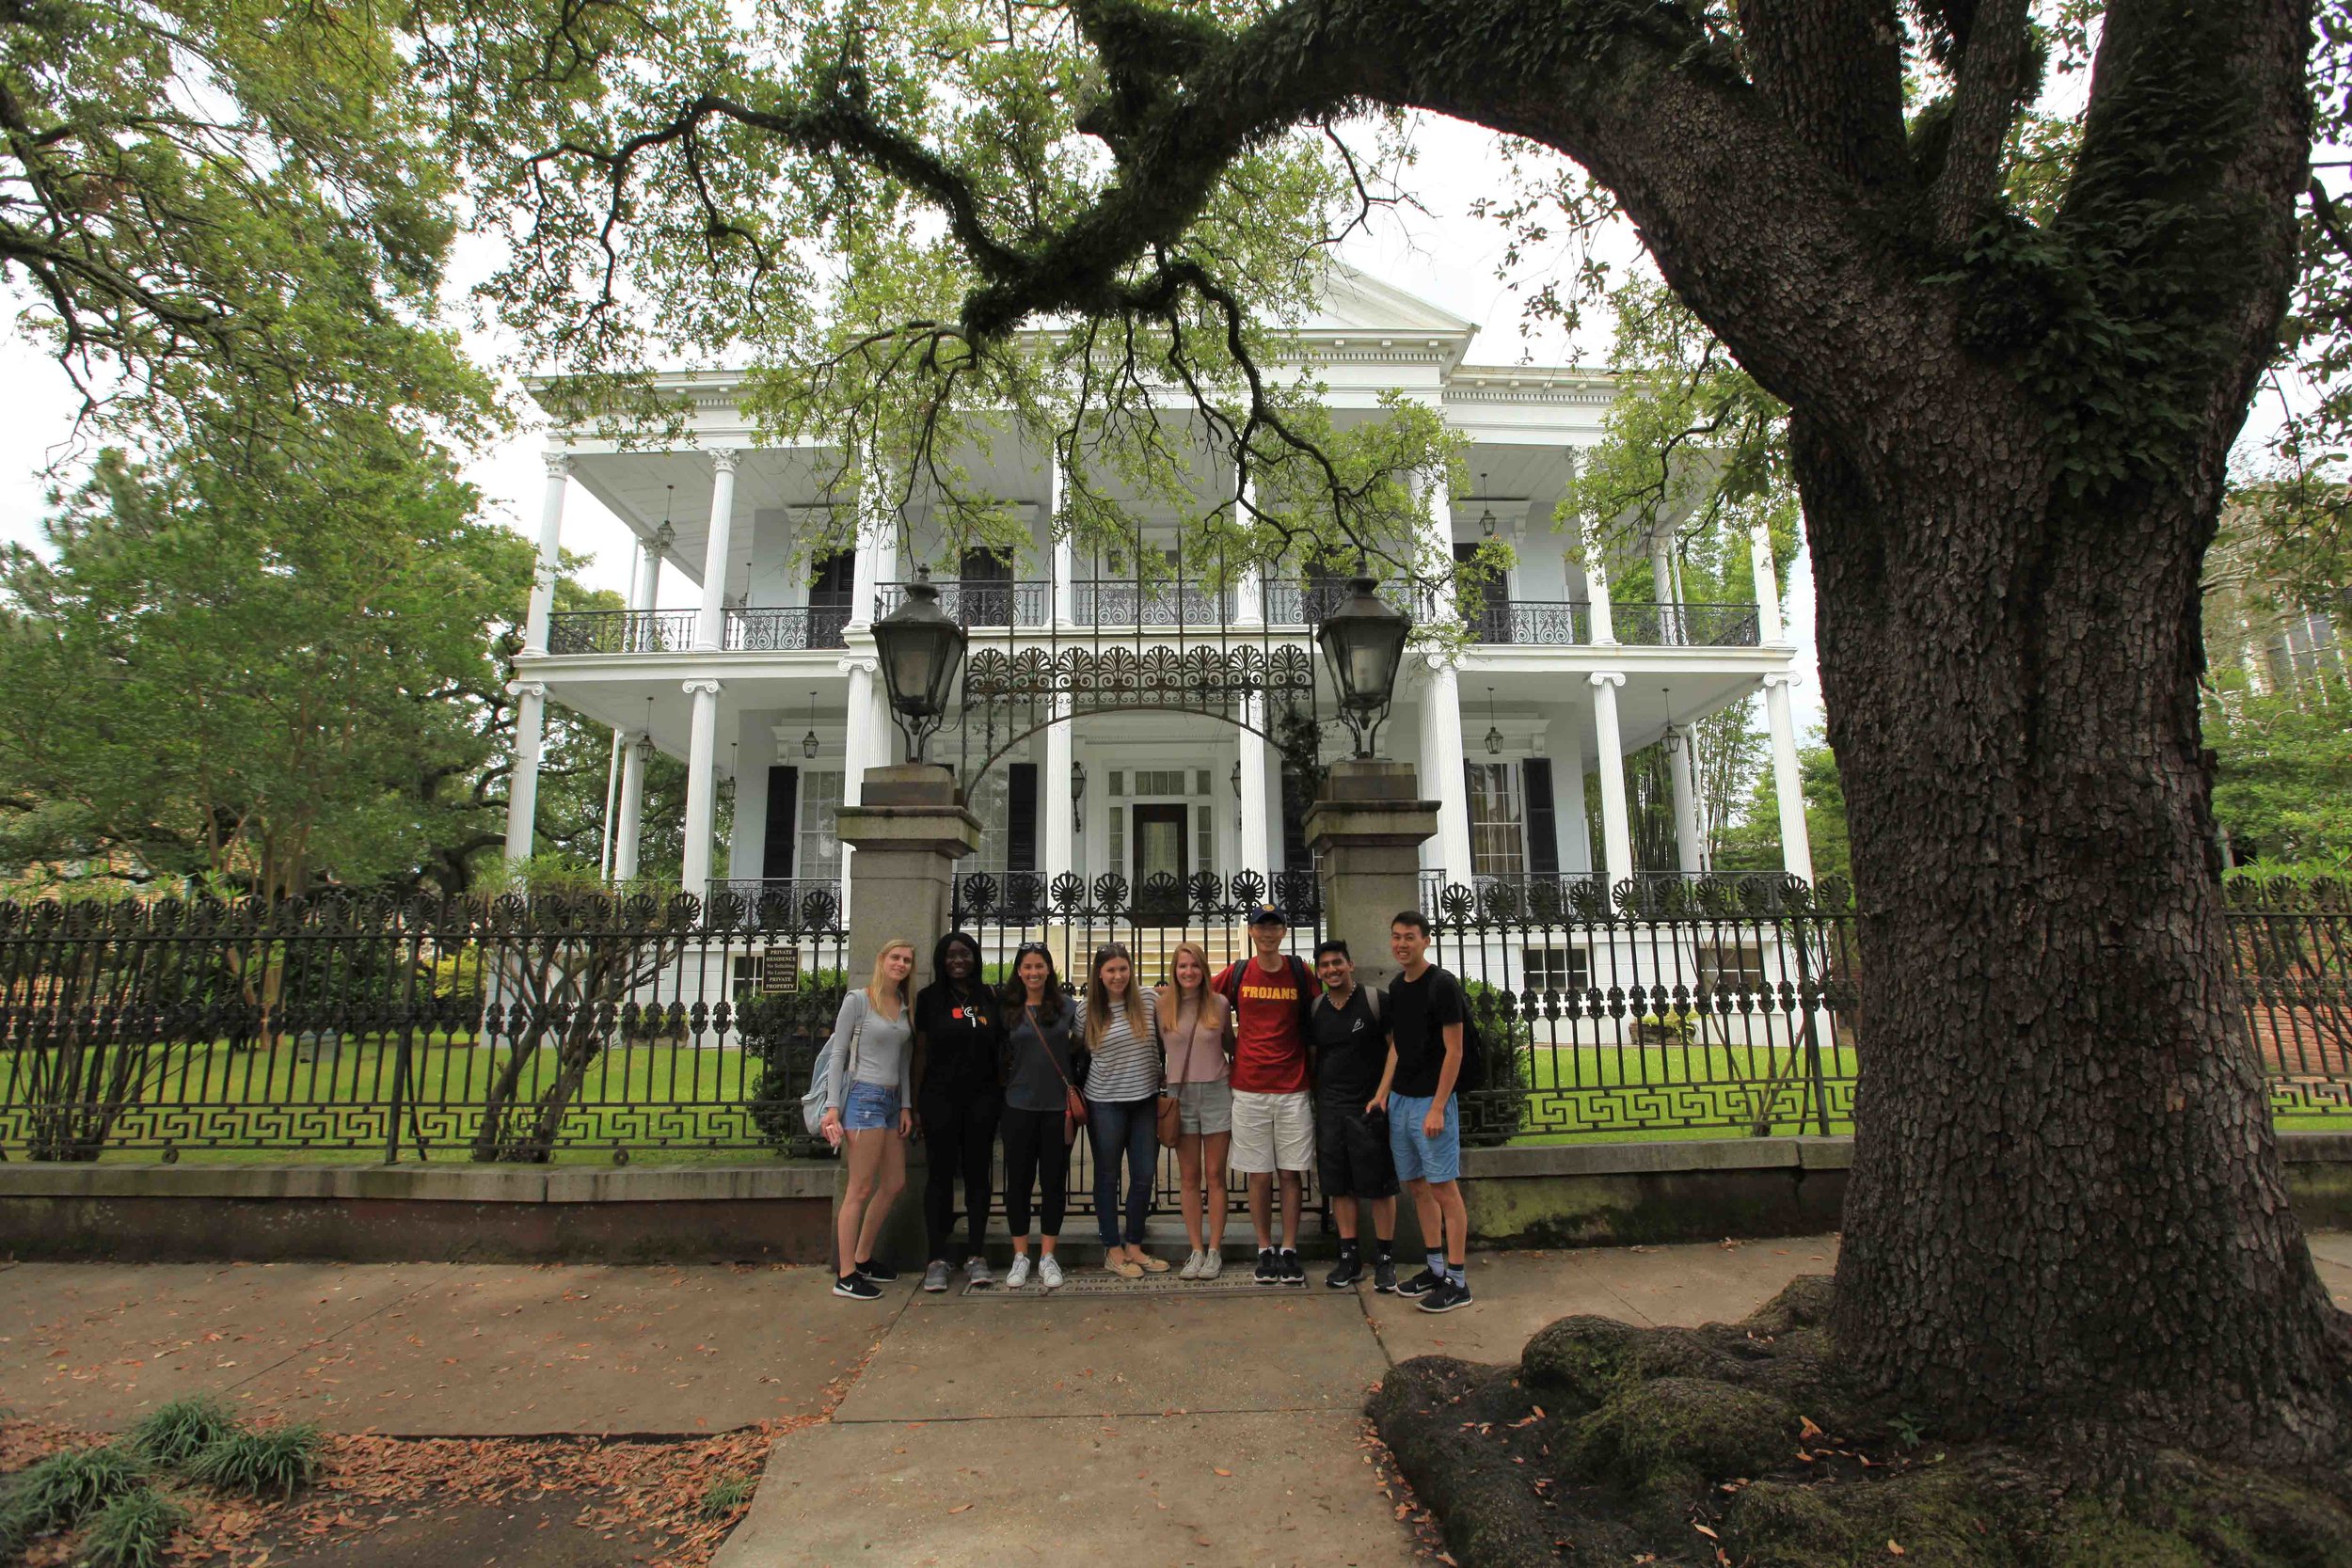  This was the house used as the 'Coven House' in the FX series 'American Horror Story'. 